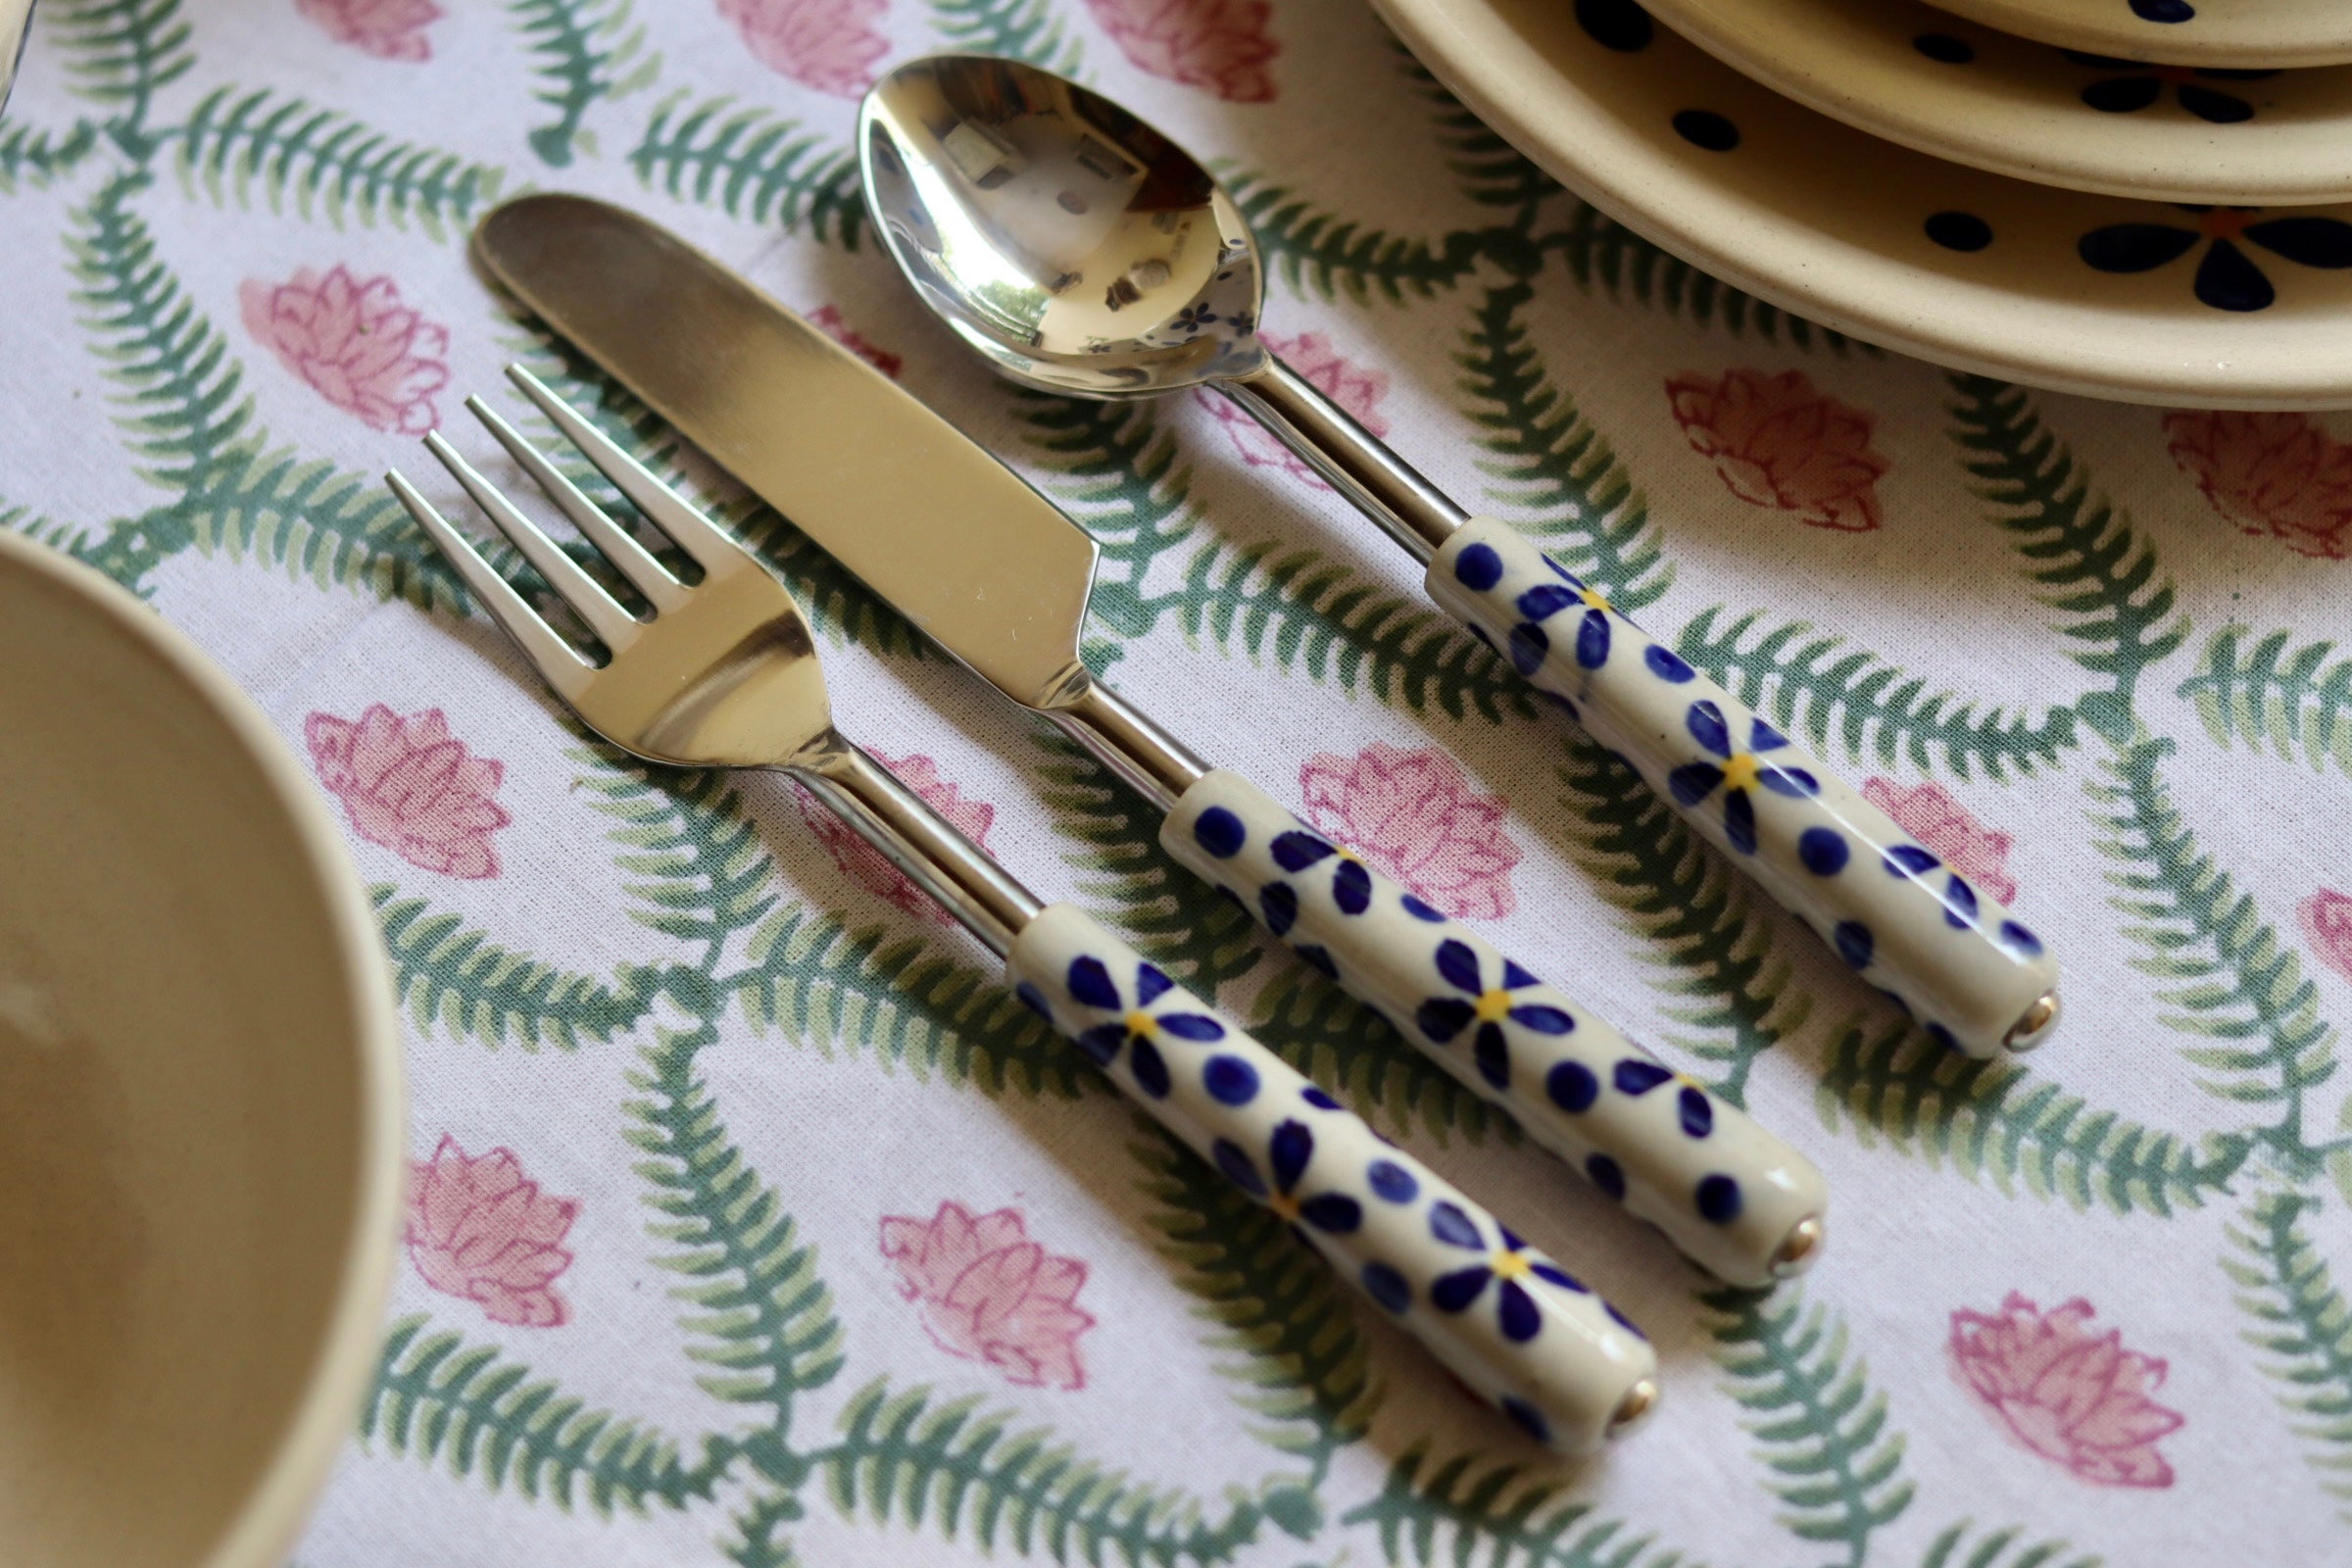 A floral cutlery set having spoon, knife and fork